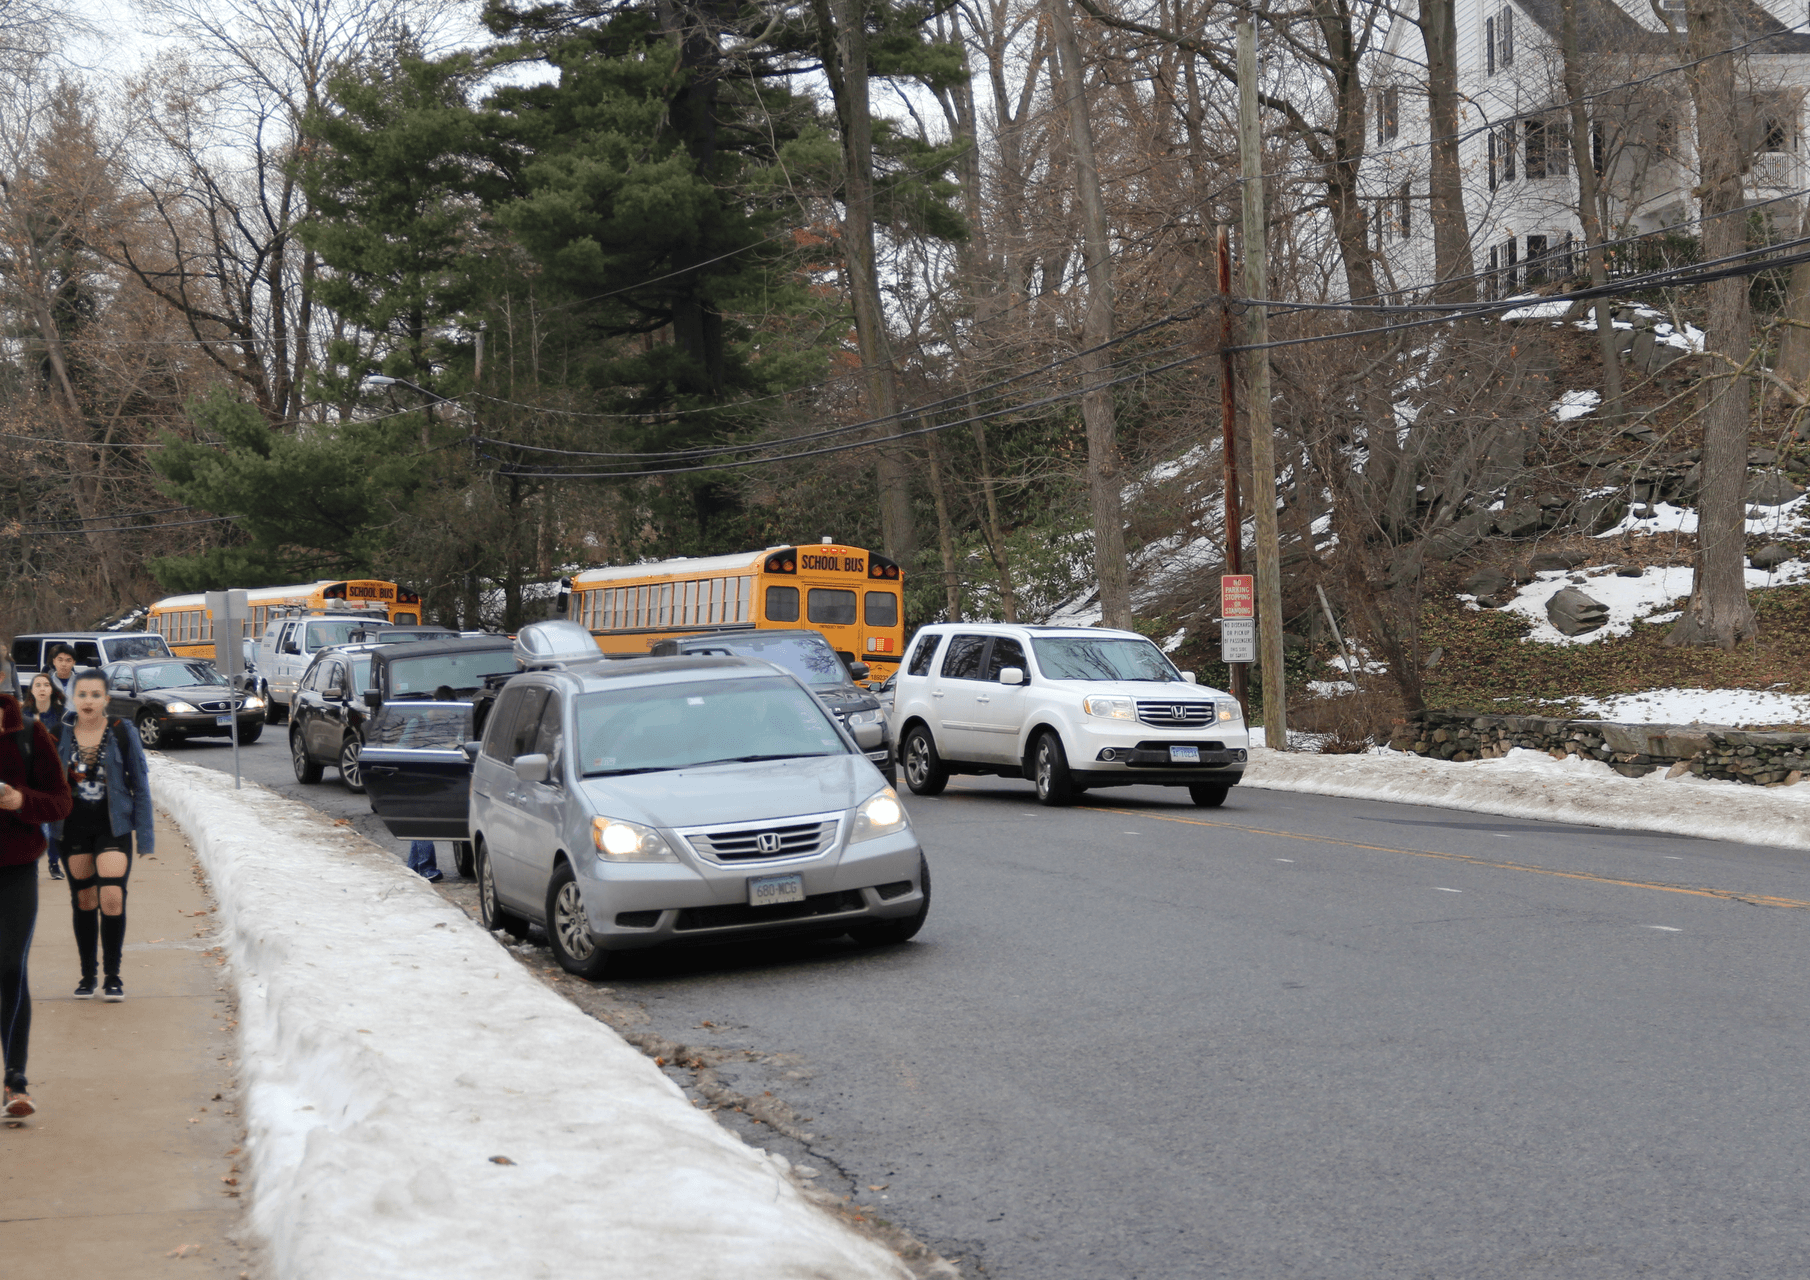 Car crosses double yellow line around double parked cars to move from Hillside Rd toward East Putnam Ave at dismissal time. Jan 11, 2018 Photo: Leslie Yager